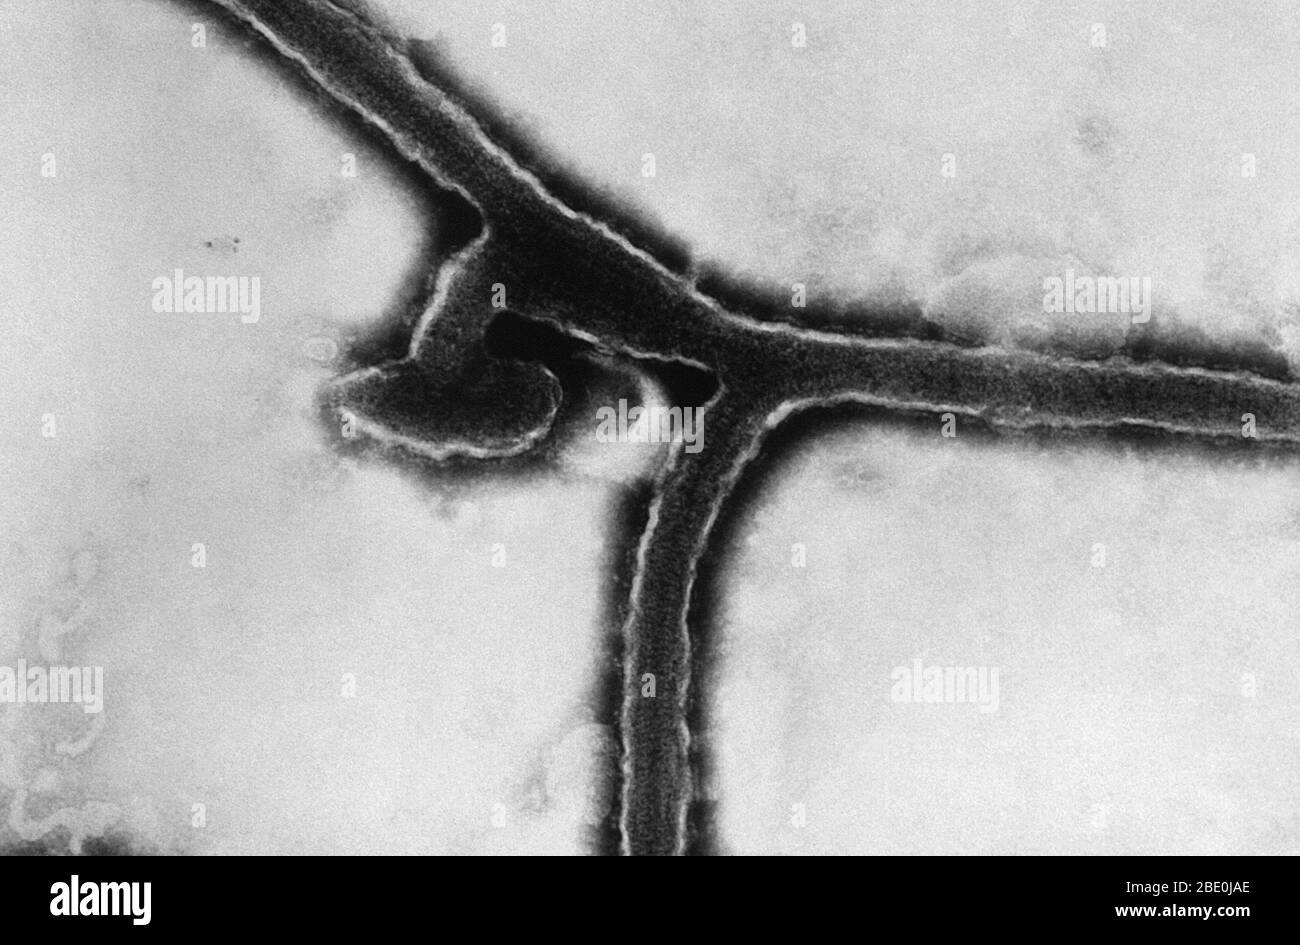 Transmission Electron Micrograph (TEM) of the Marburg virus. Marburg virus (MARV) is a hemorrhagic fever virus of the Filoviridae family of viruses and a member of the species Marburg marburgvirus, genus Marburgvirus. MARV causes Marburg virus disease in humans and nonhuman primates, a form of viral hemorrhagic fever. The virus is considered to be extremely dangerous. The WHO rates it as a Risk Group 4 Pathogen (requiring biosafety level 4-equivalent containment). In the United States, the NIH/NIAID ranks it as a Category A Priority Pathogen and the CDC lists it as a Category A Bioterrorism Ag Stock Photo